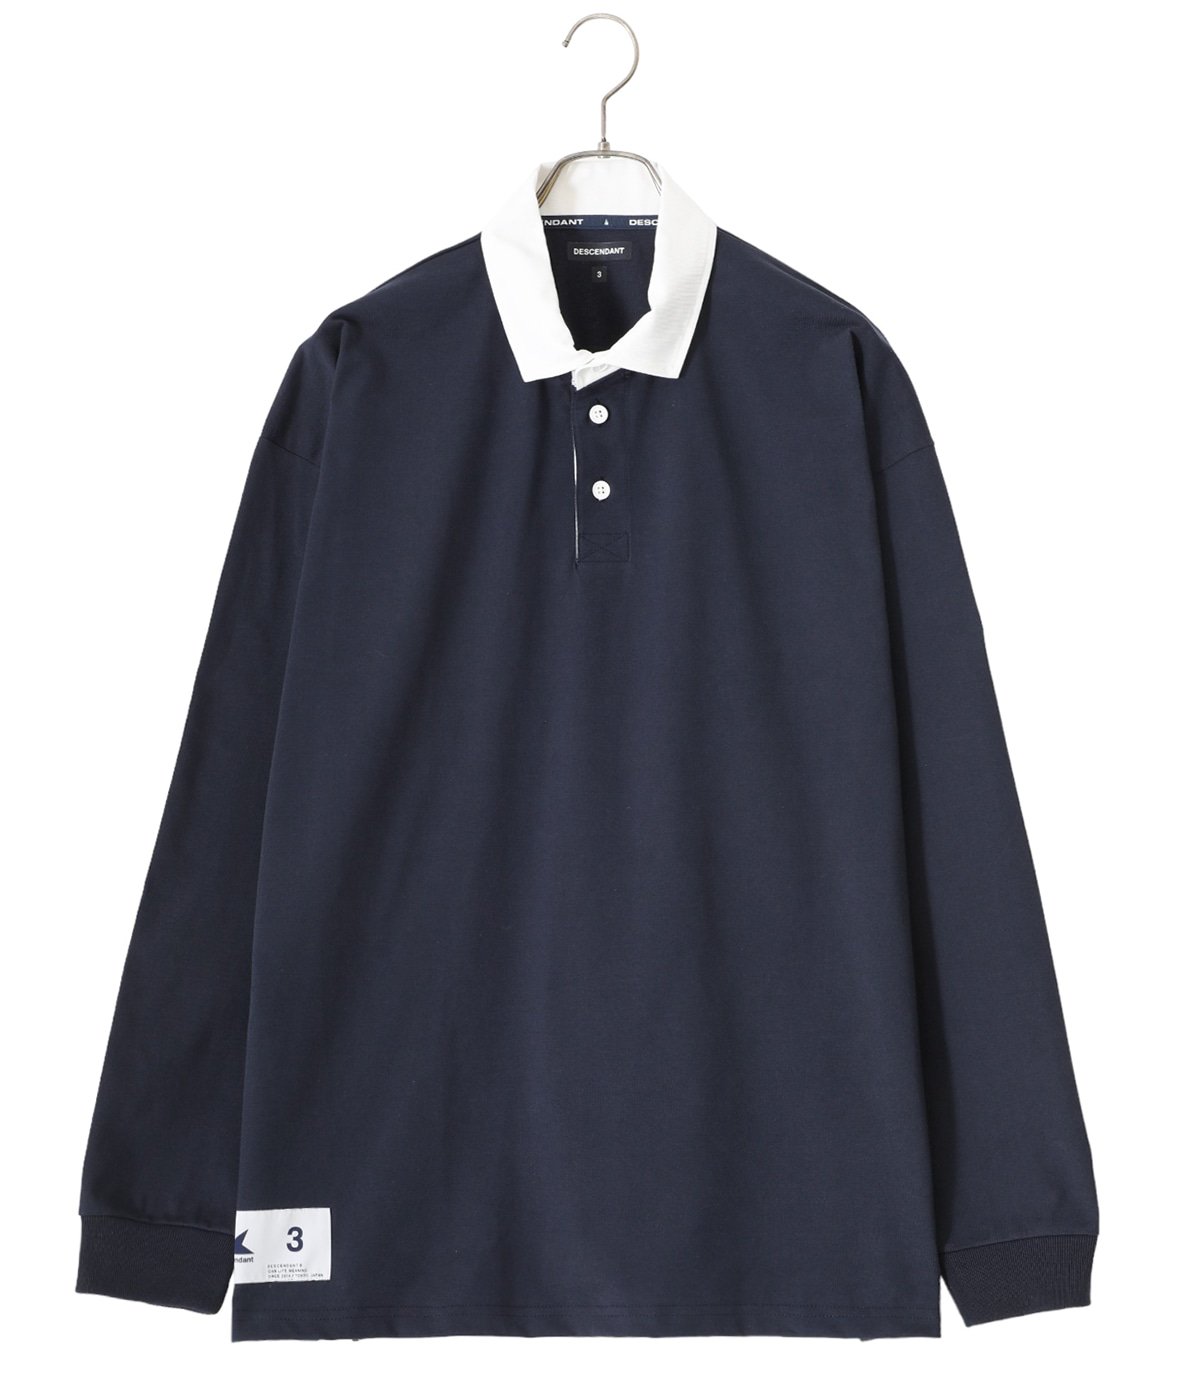 CROUCH POLO LS | DESCENDANT(ディセンダント) / トップス カットソー ...